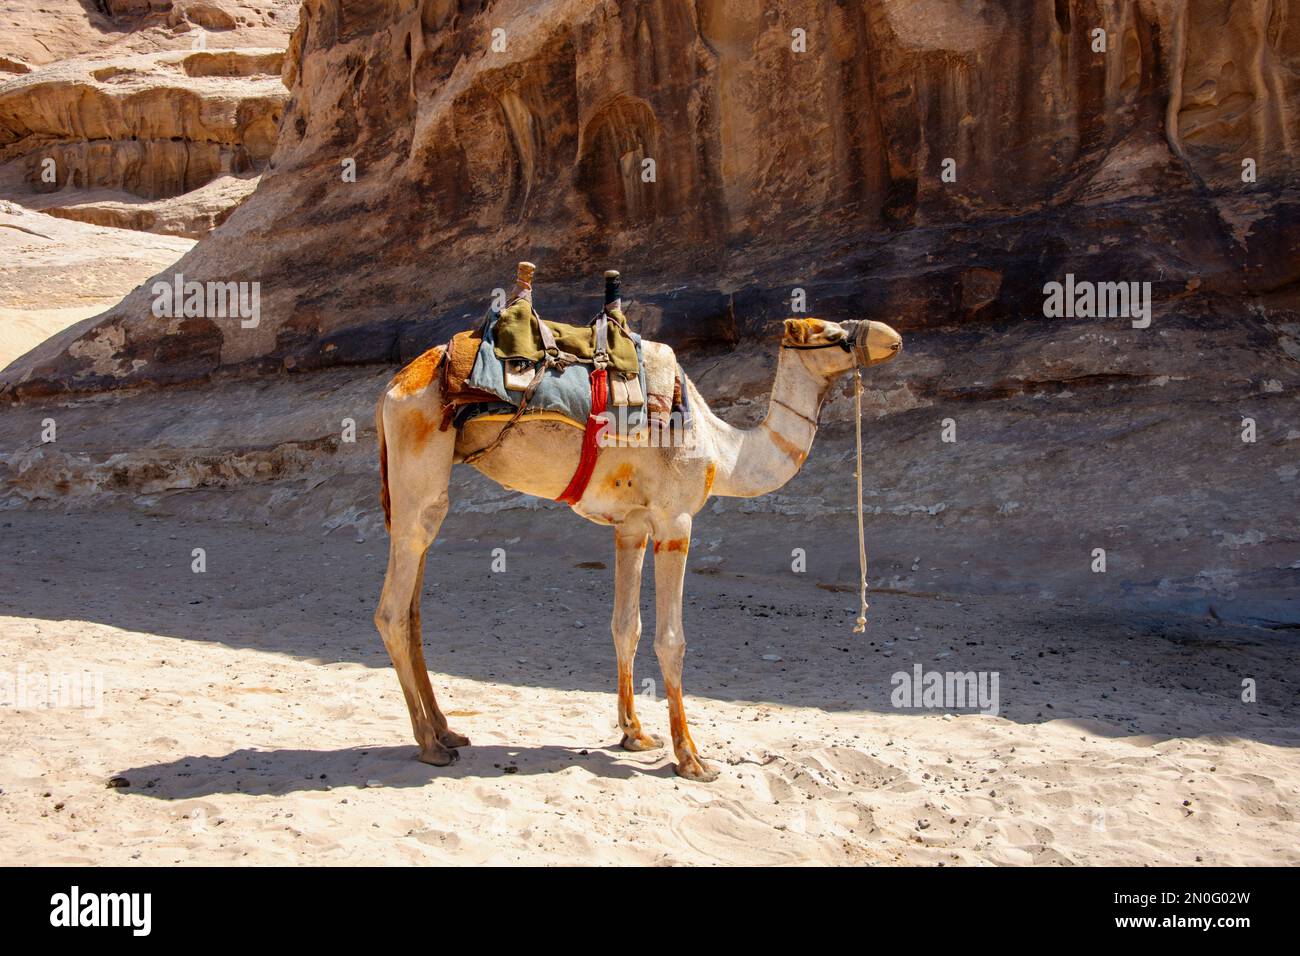 Colorful picture of a camel with saddle in the desert in an arabic land Stock Photo